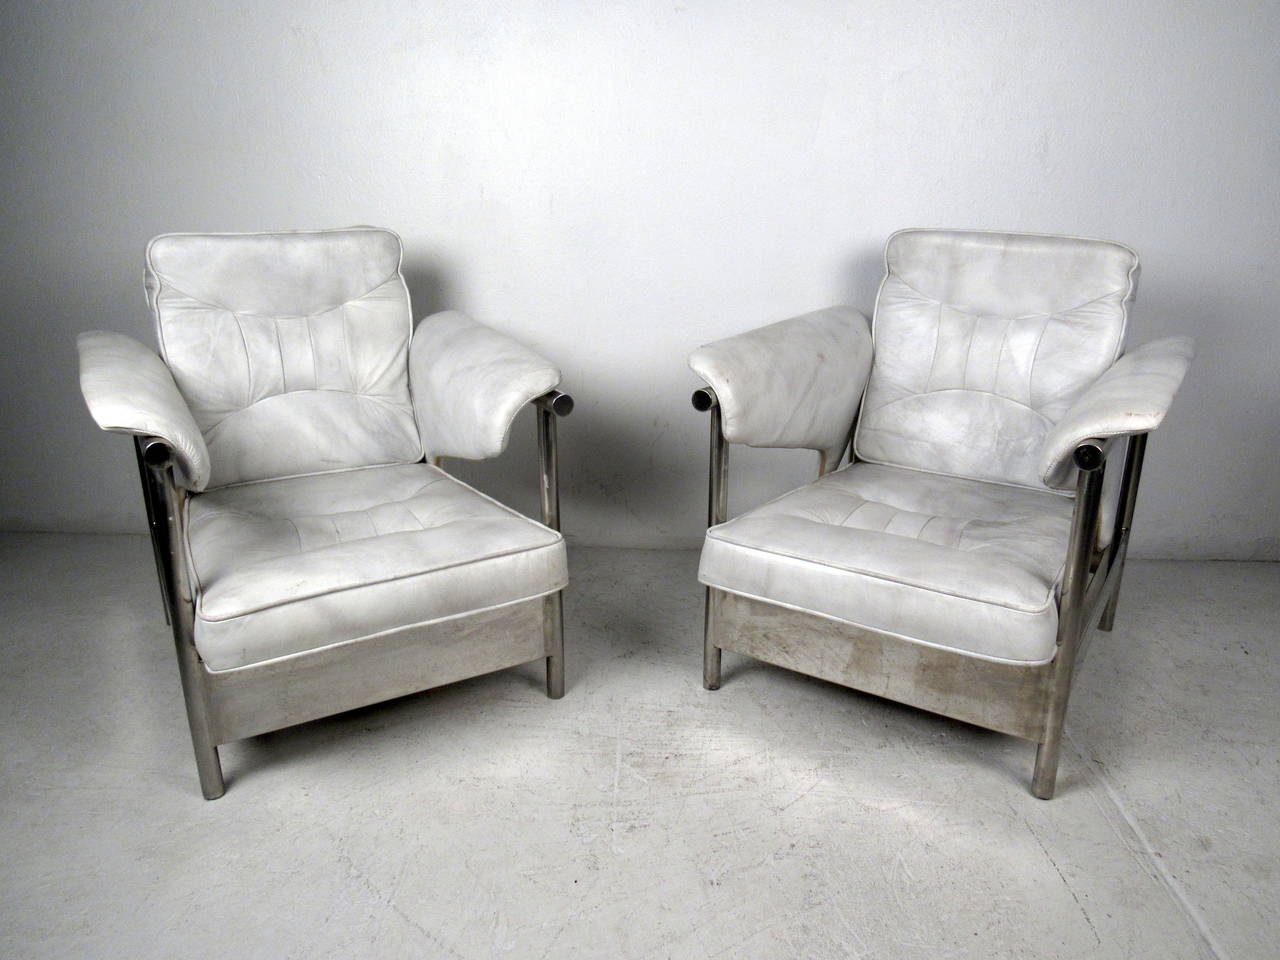 This pair of Italian lounge chairs feature a heavy chrome frame and vintage white leather upholstery which offer a bold modern flare to any home or office space.

Please confirm item location (NY or NJ) with dealer.